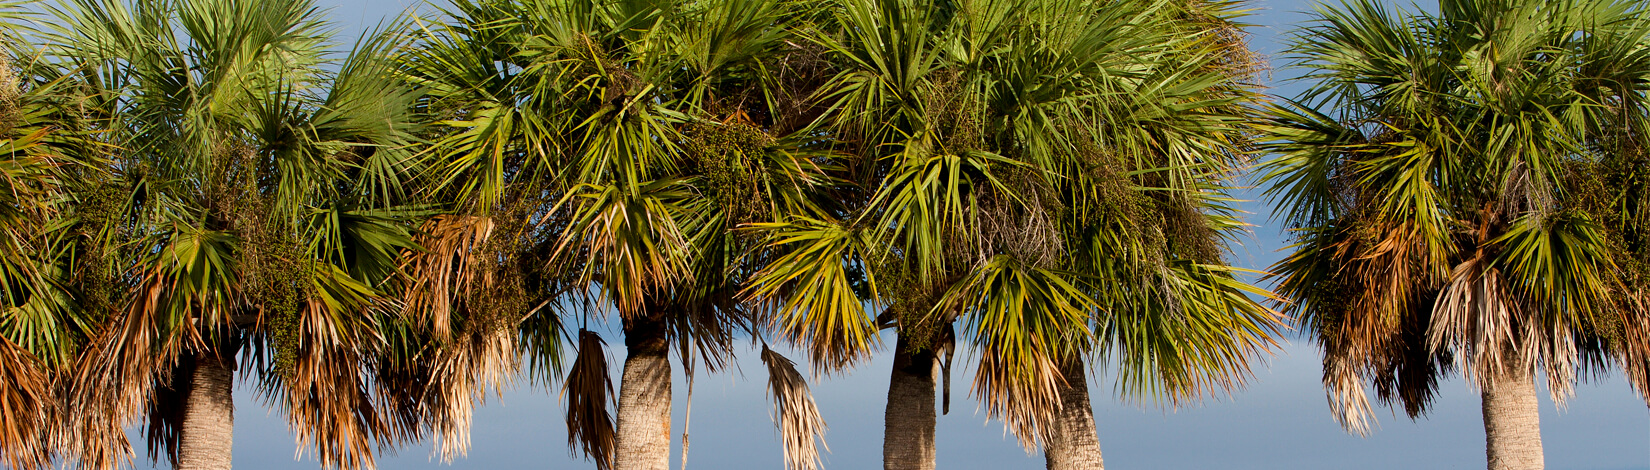 cabbage palm trees